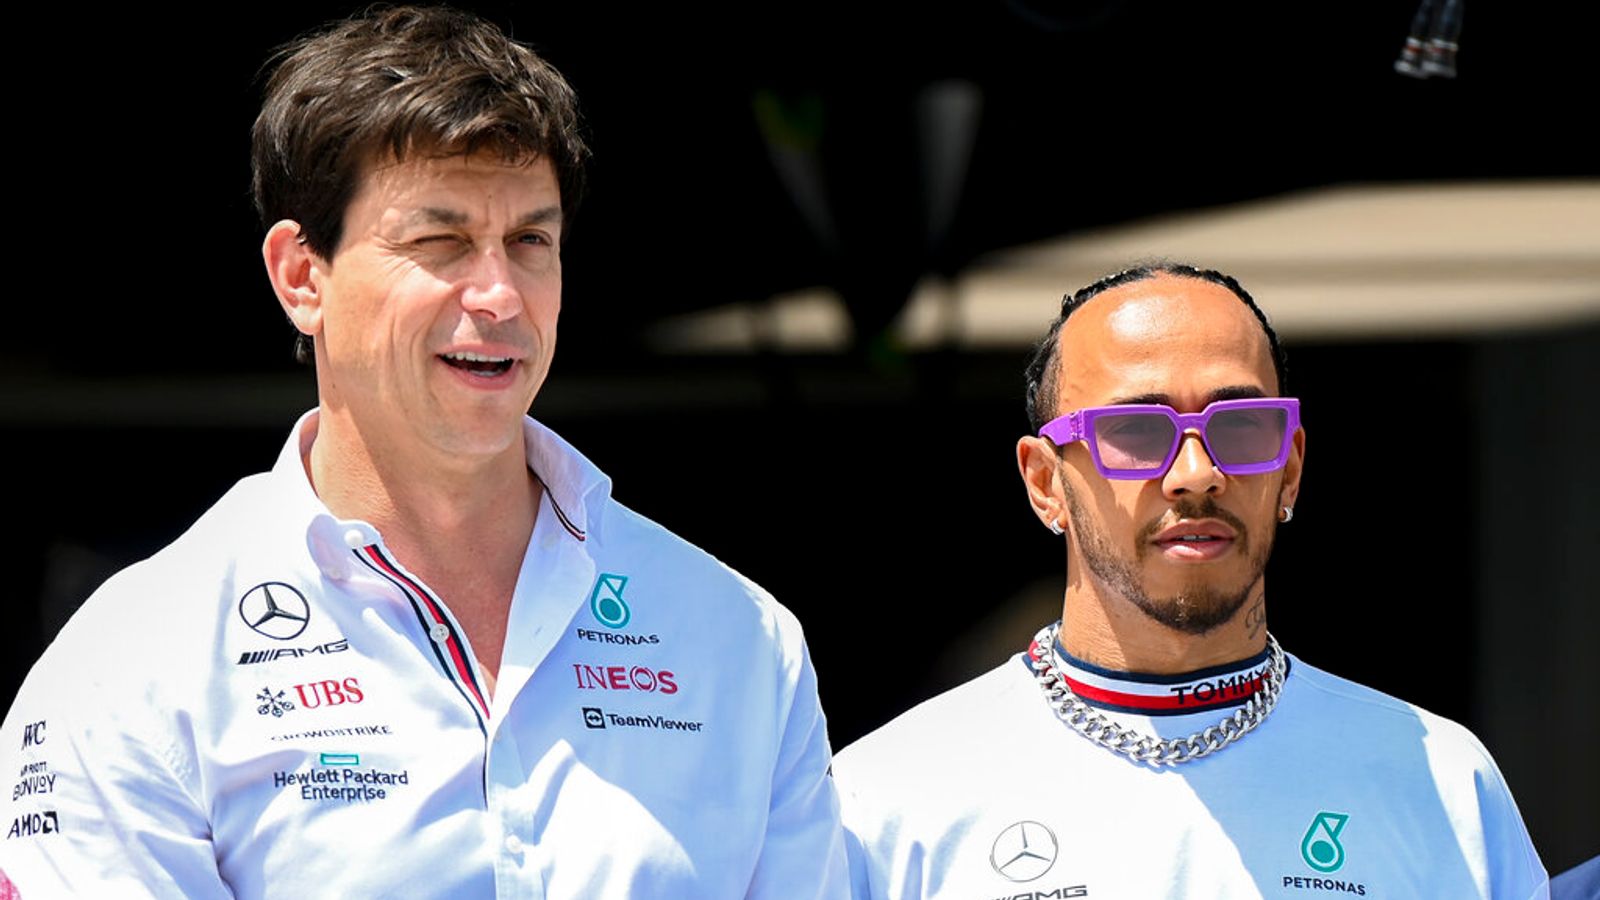 Lewis Hamilton: Mercedes boss Toto Wolff says timing of F1 star's Ferrari decision 'bit us' - but insists he holds 'no grudge'